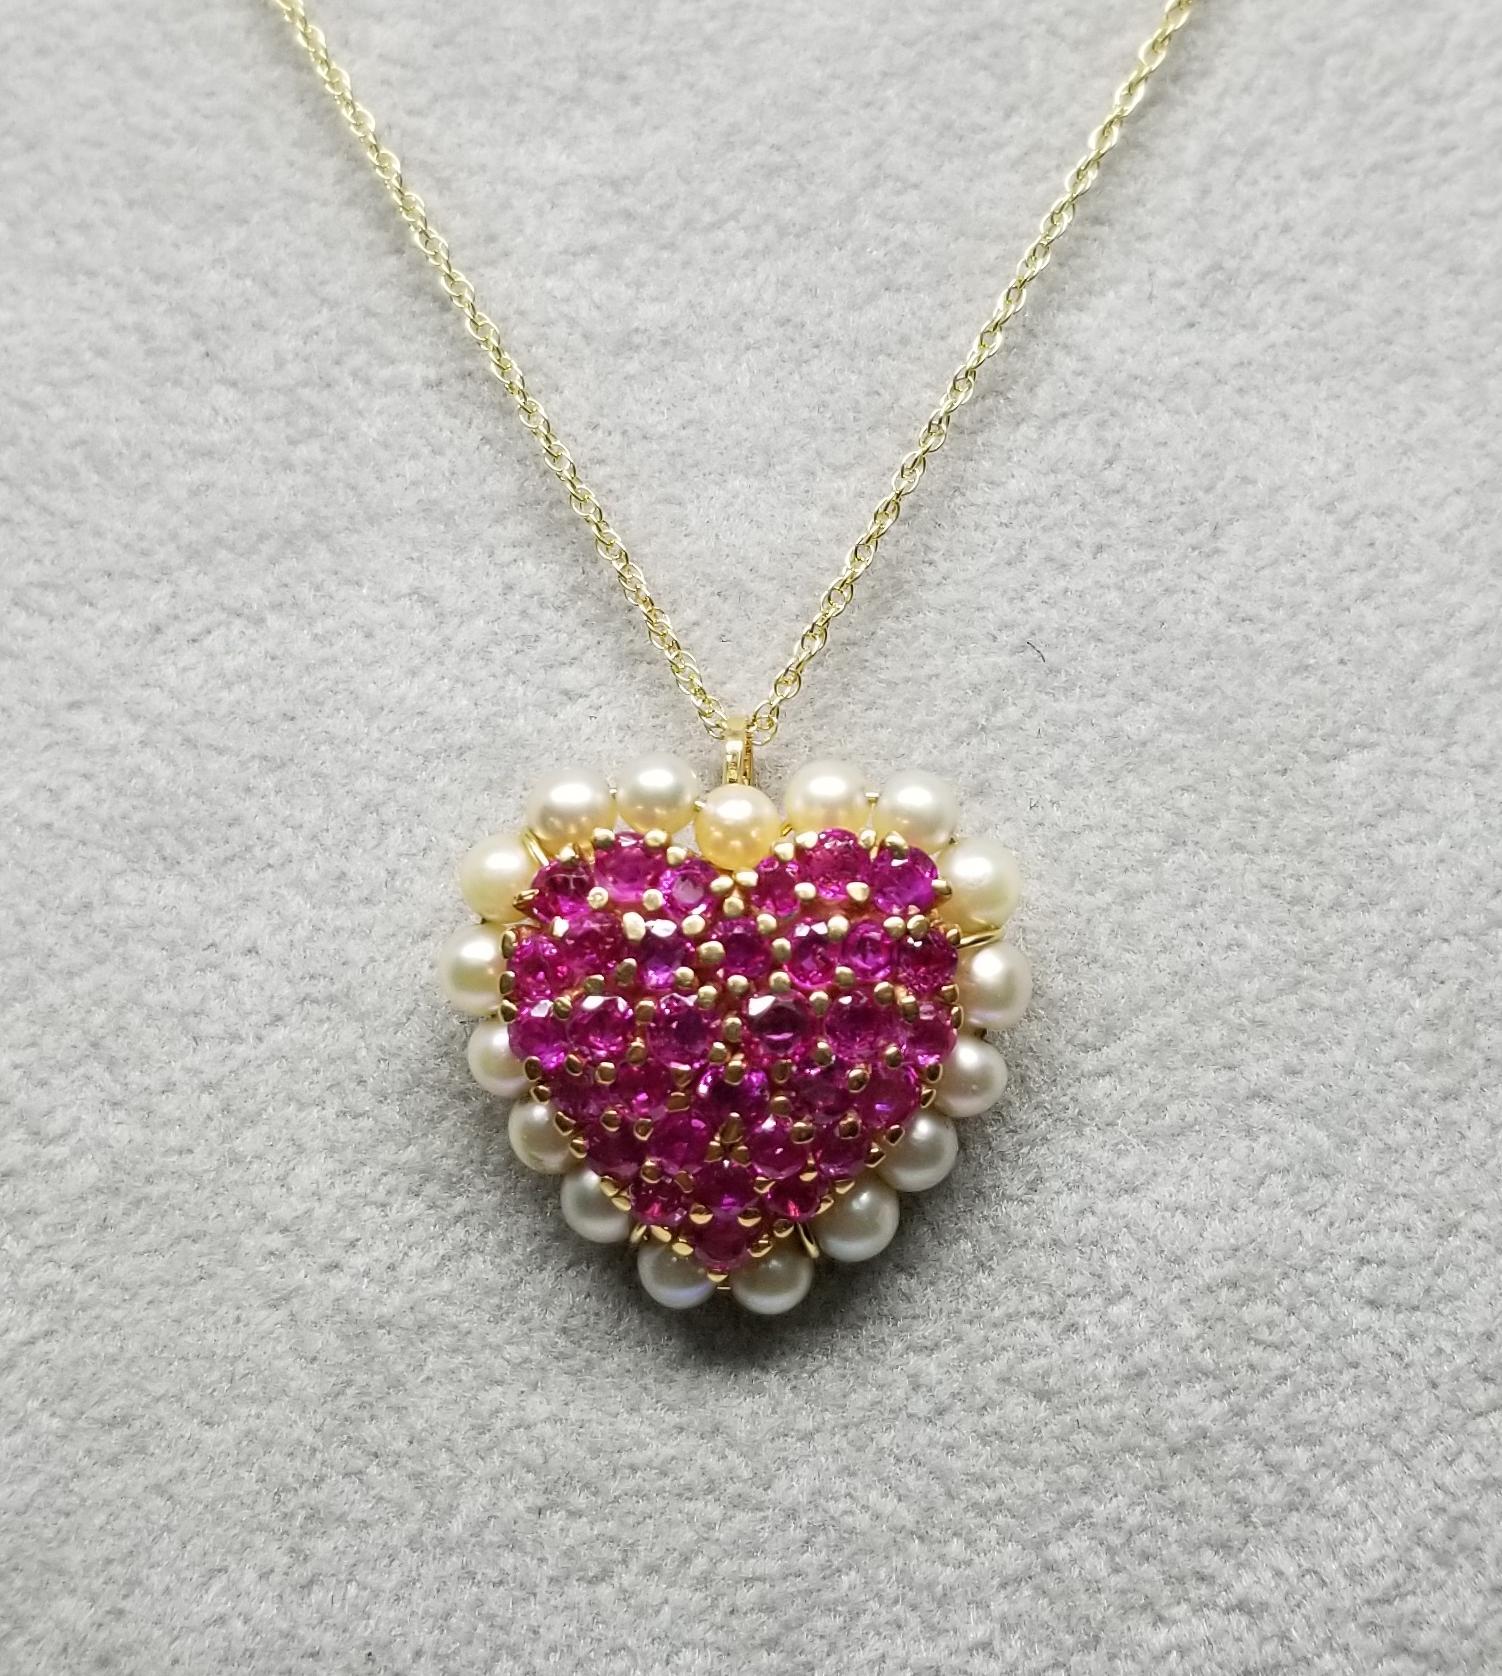 14k yellow gold Ruby and Pearl pendant containing 28 round 